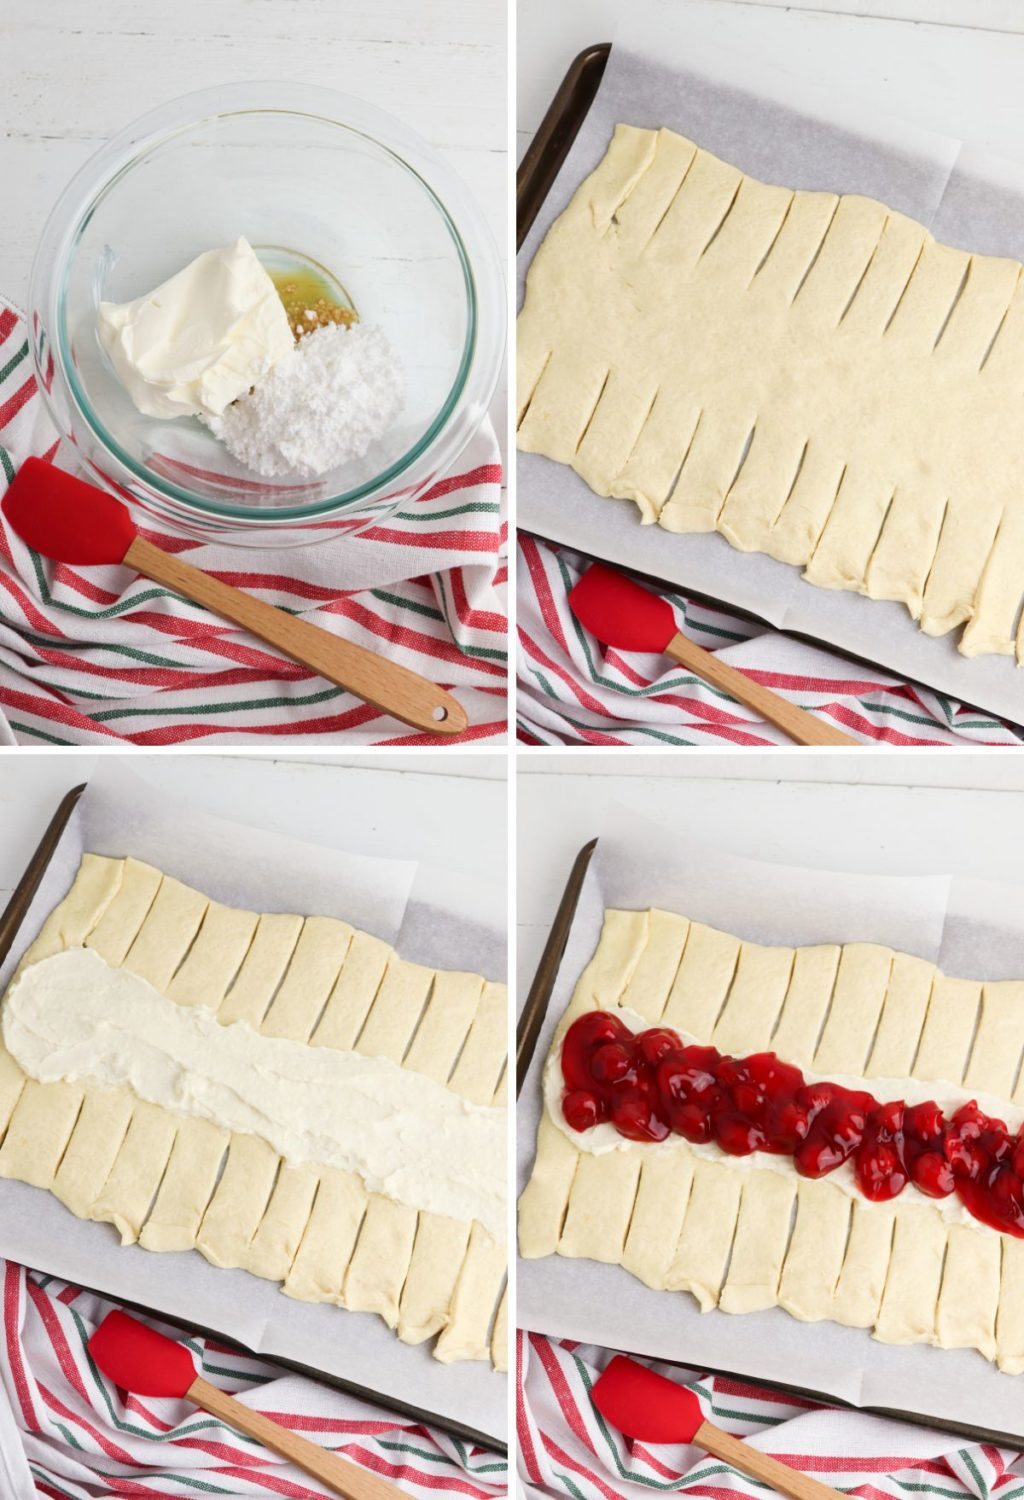 A series of photos showing how to make a cherry tart.